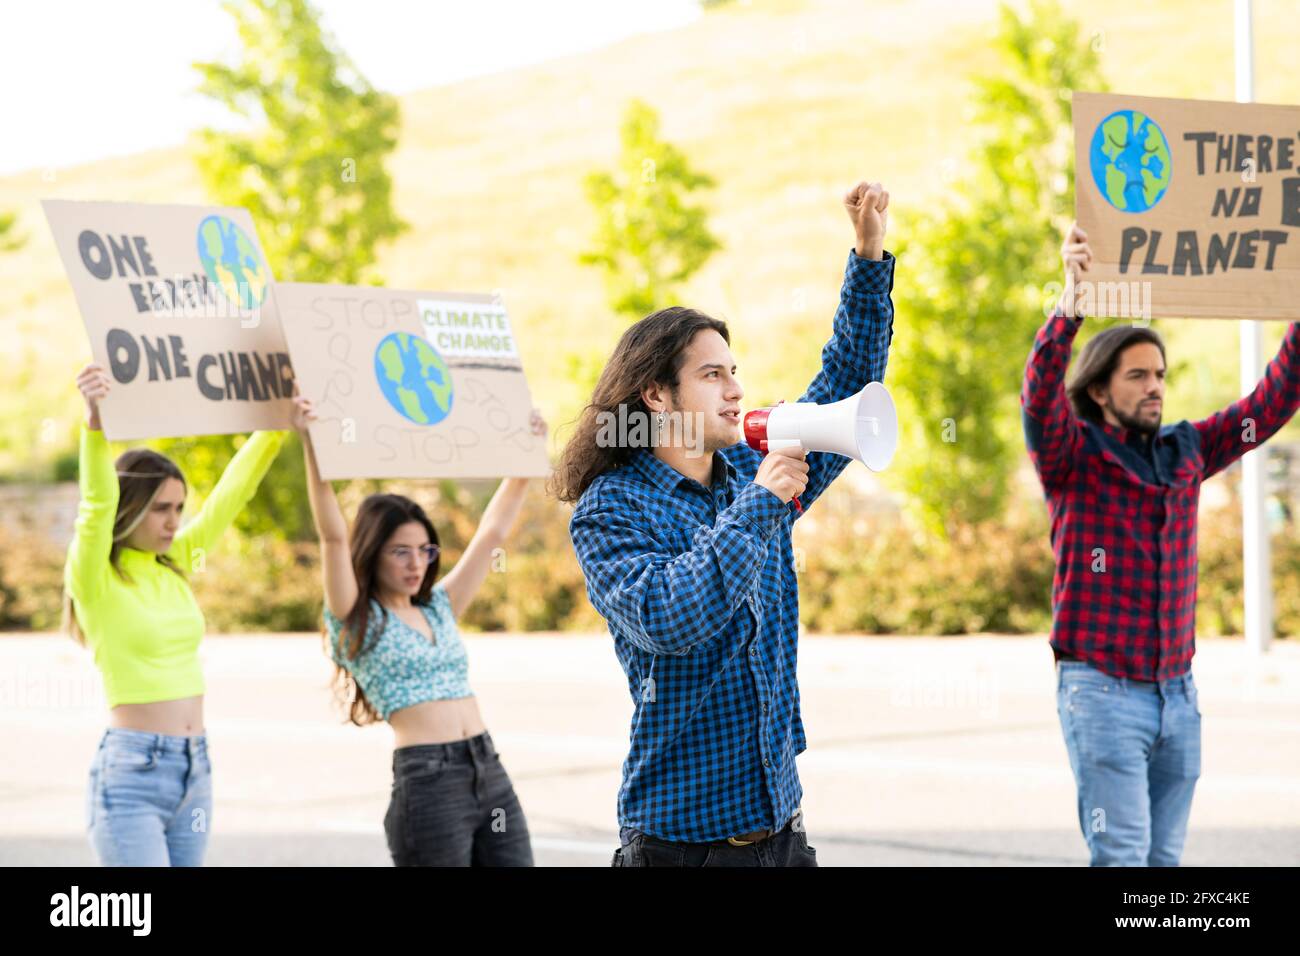 Young male activist protesting on climate change with male and female protestors on footpath Stock Photo